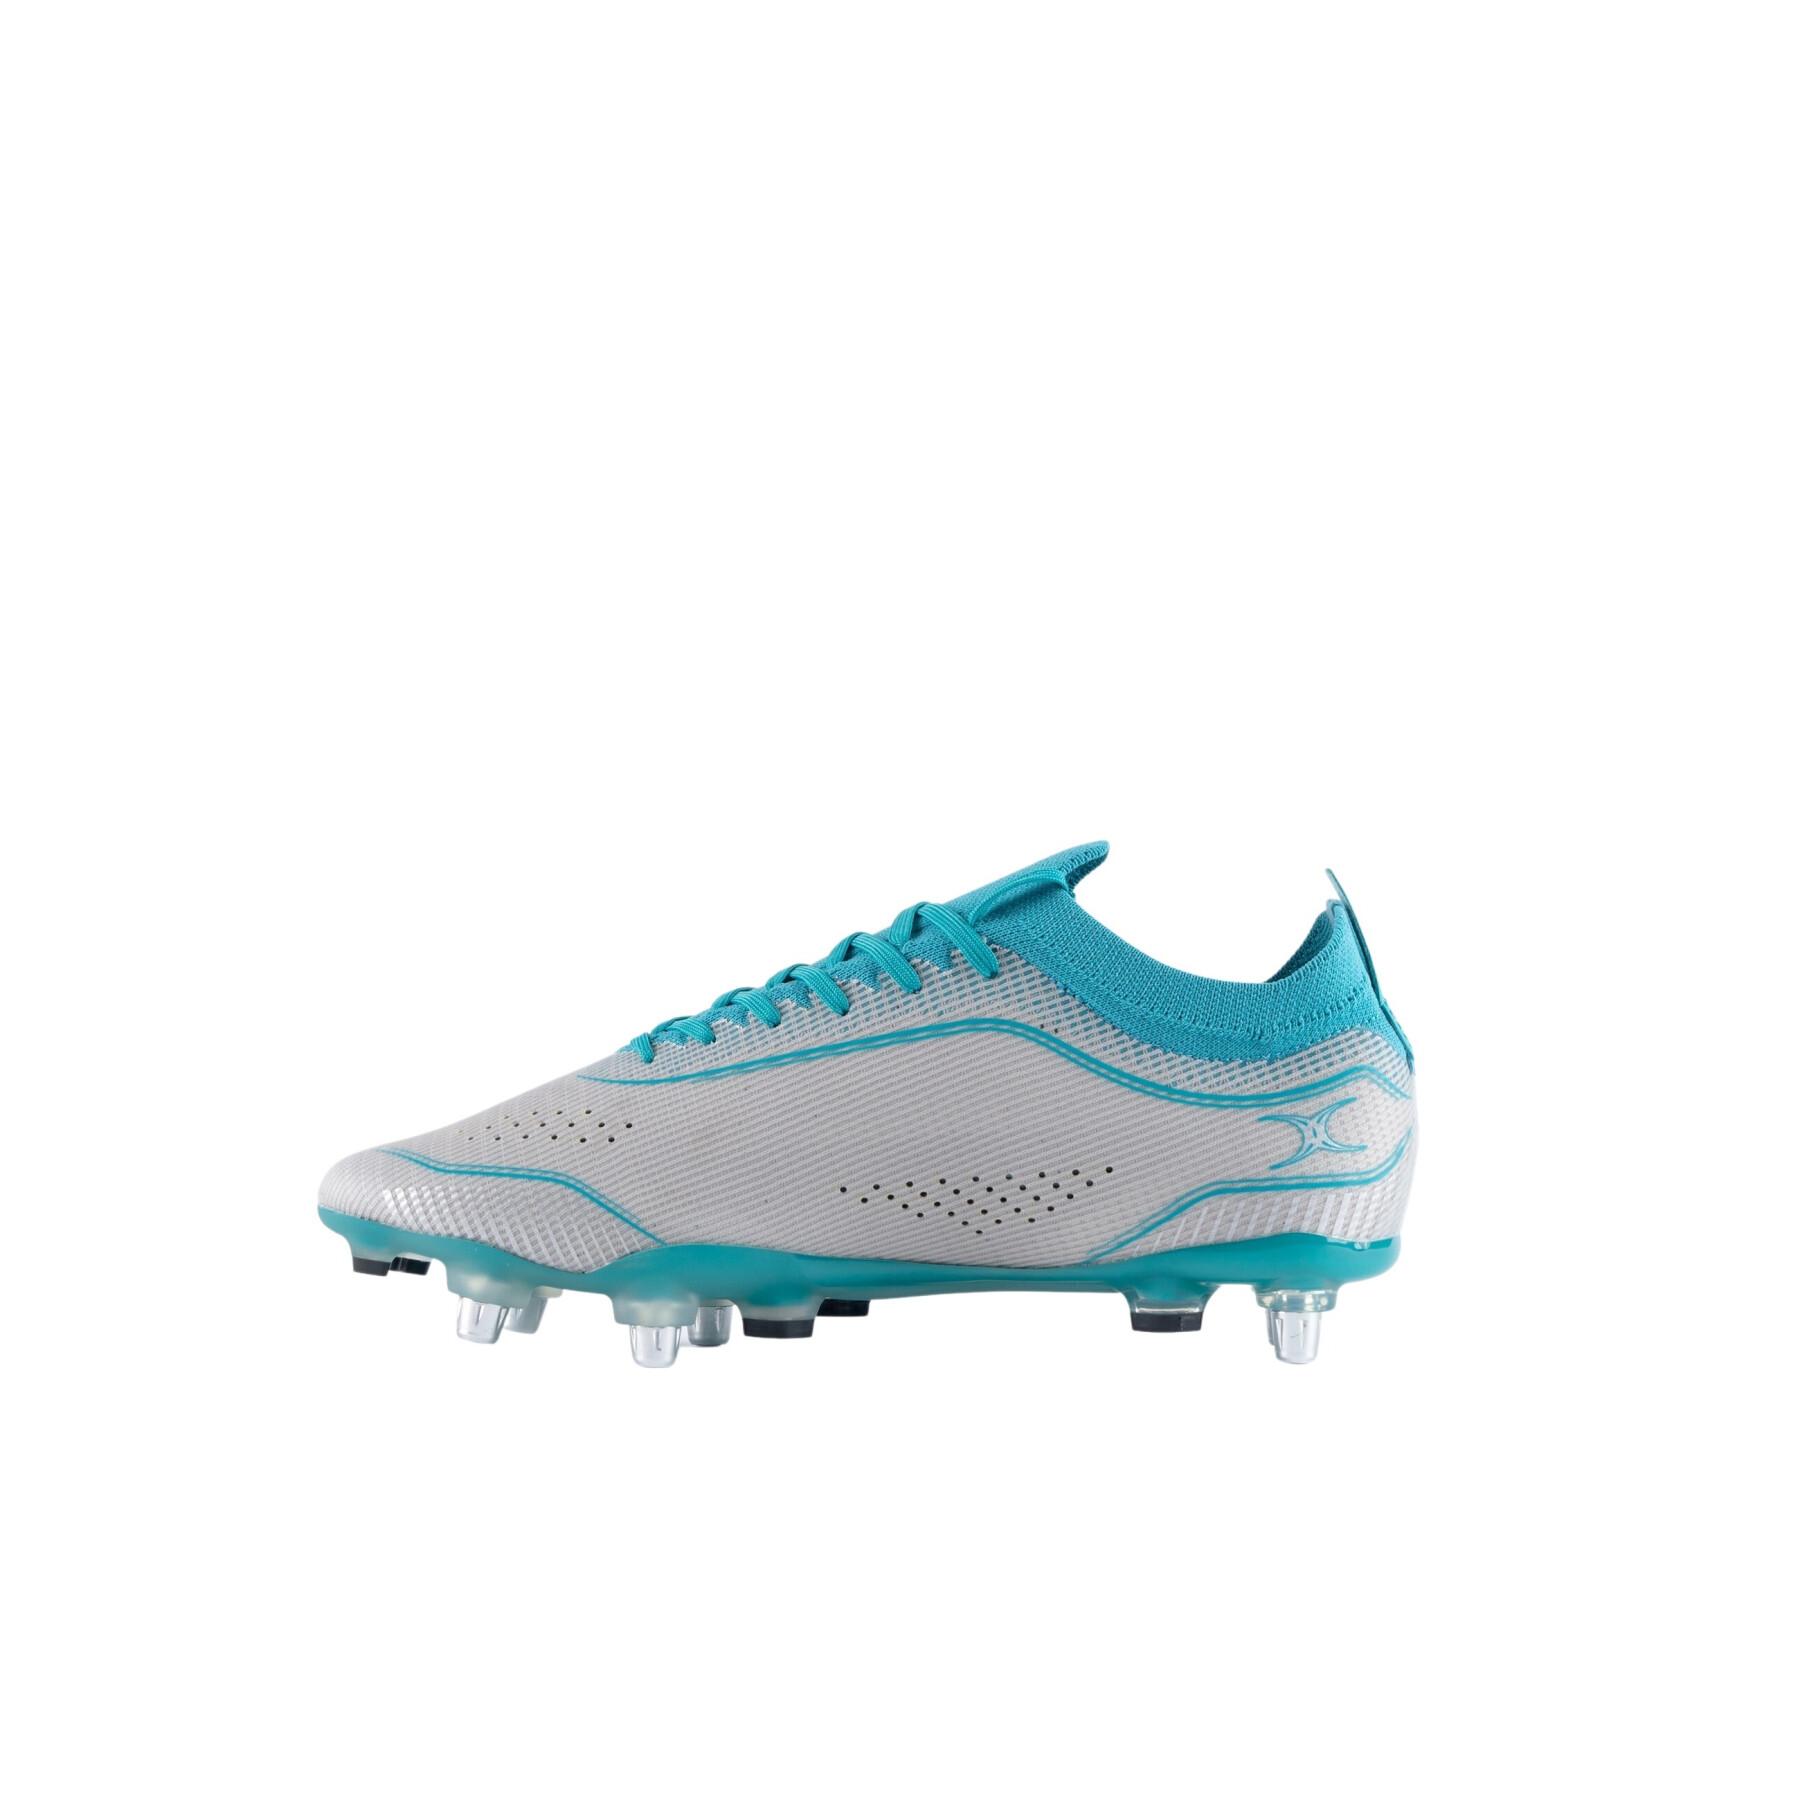 Rugby shoes Gilbert Cage Pro Pace 6S